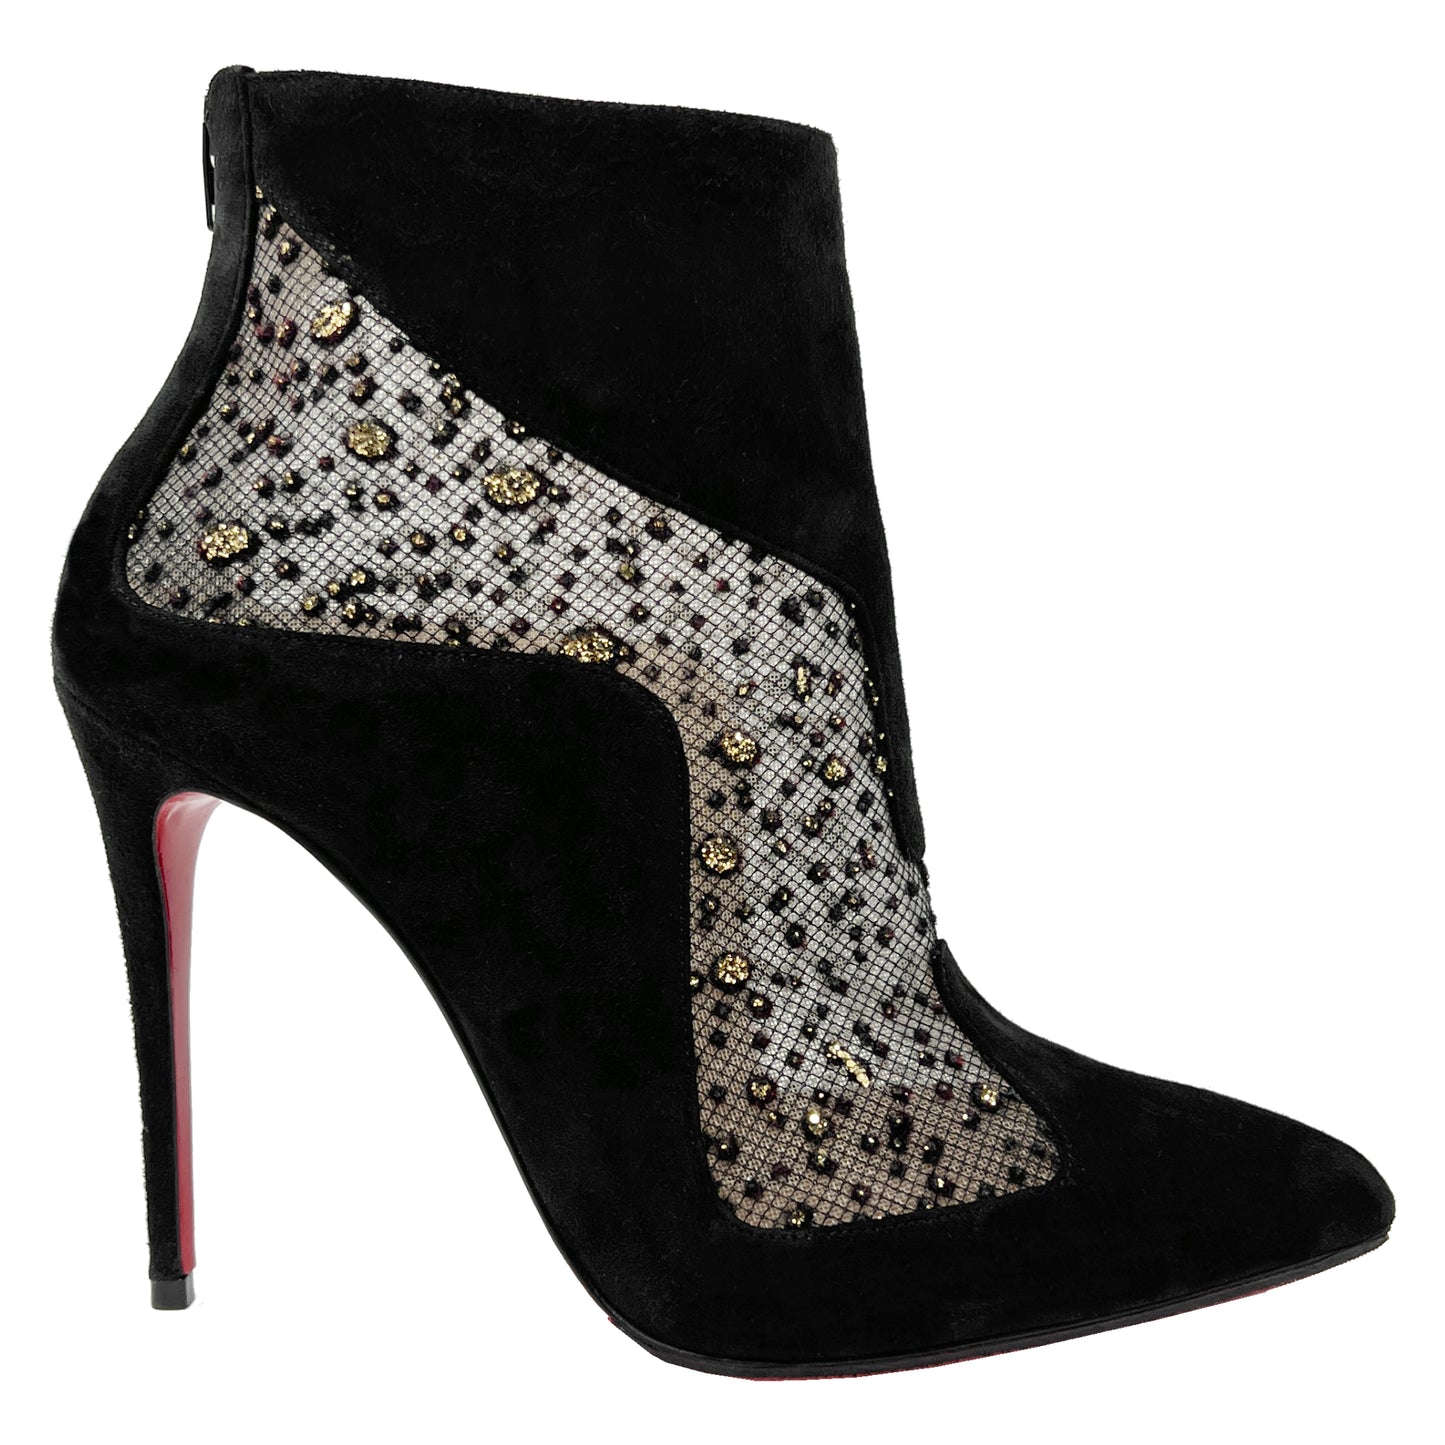 Christian Louboutin Papilloboot Black Suede Mesh Glitter Pointed Toe Ankle Boots Size EU 36